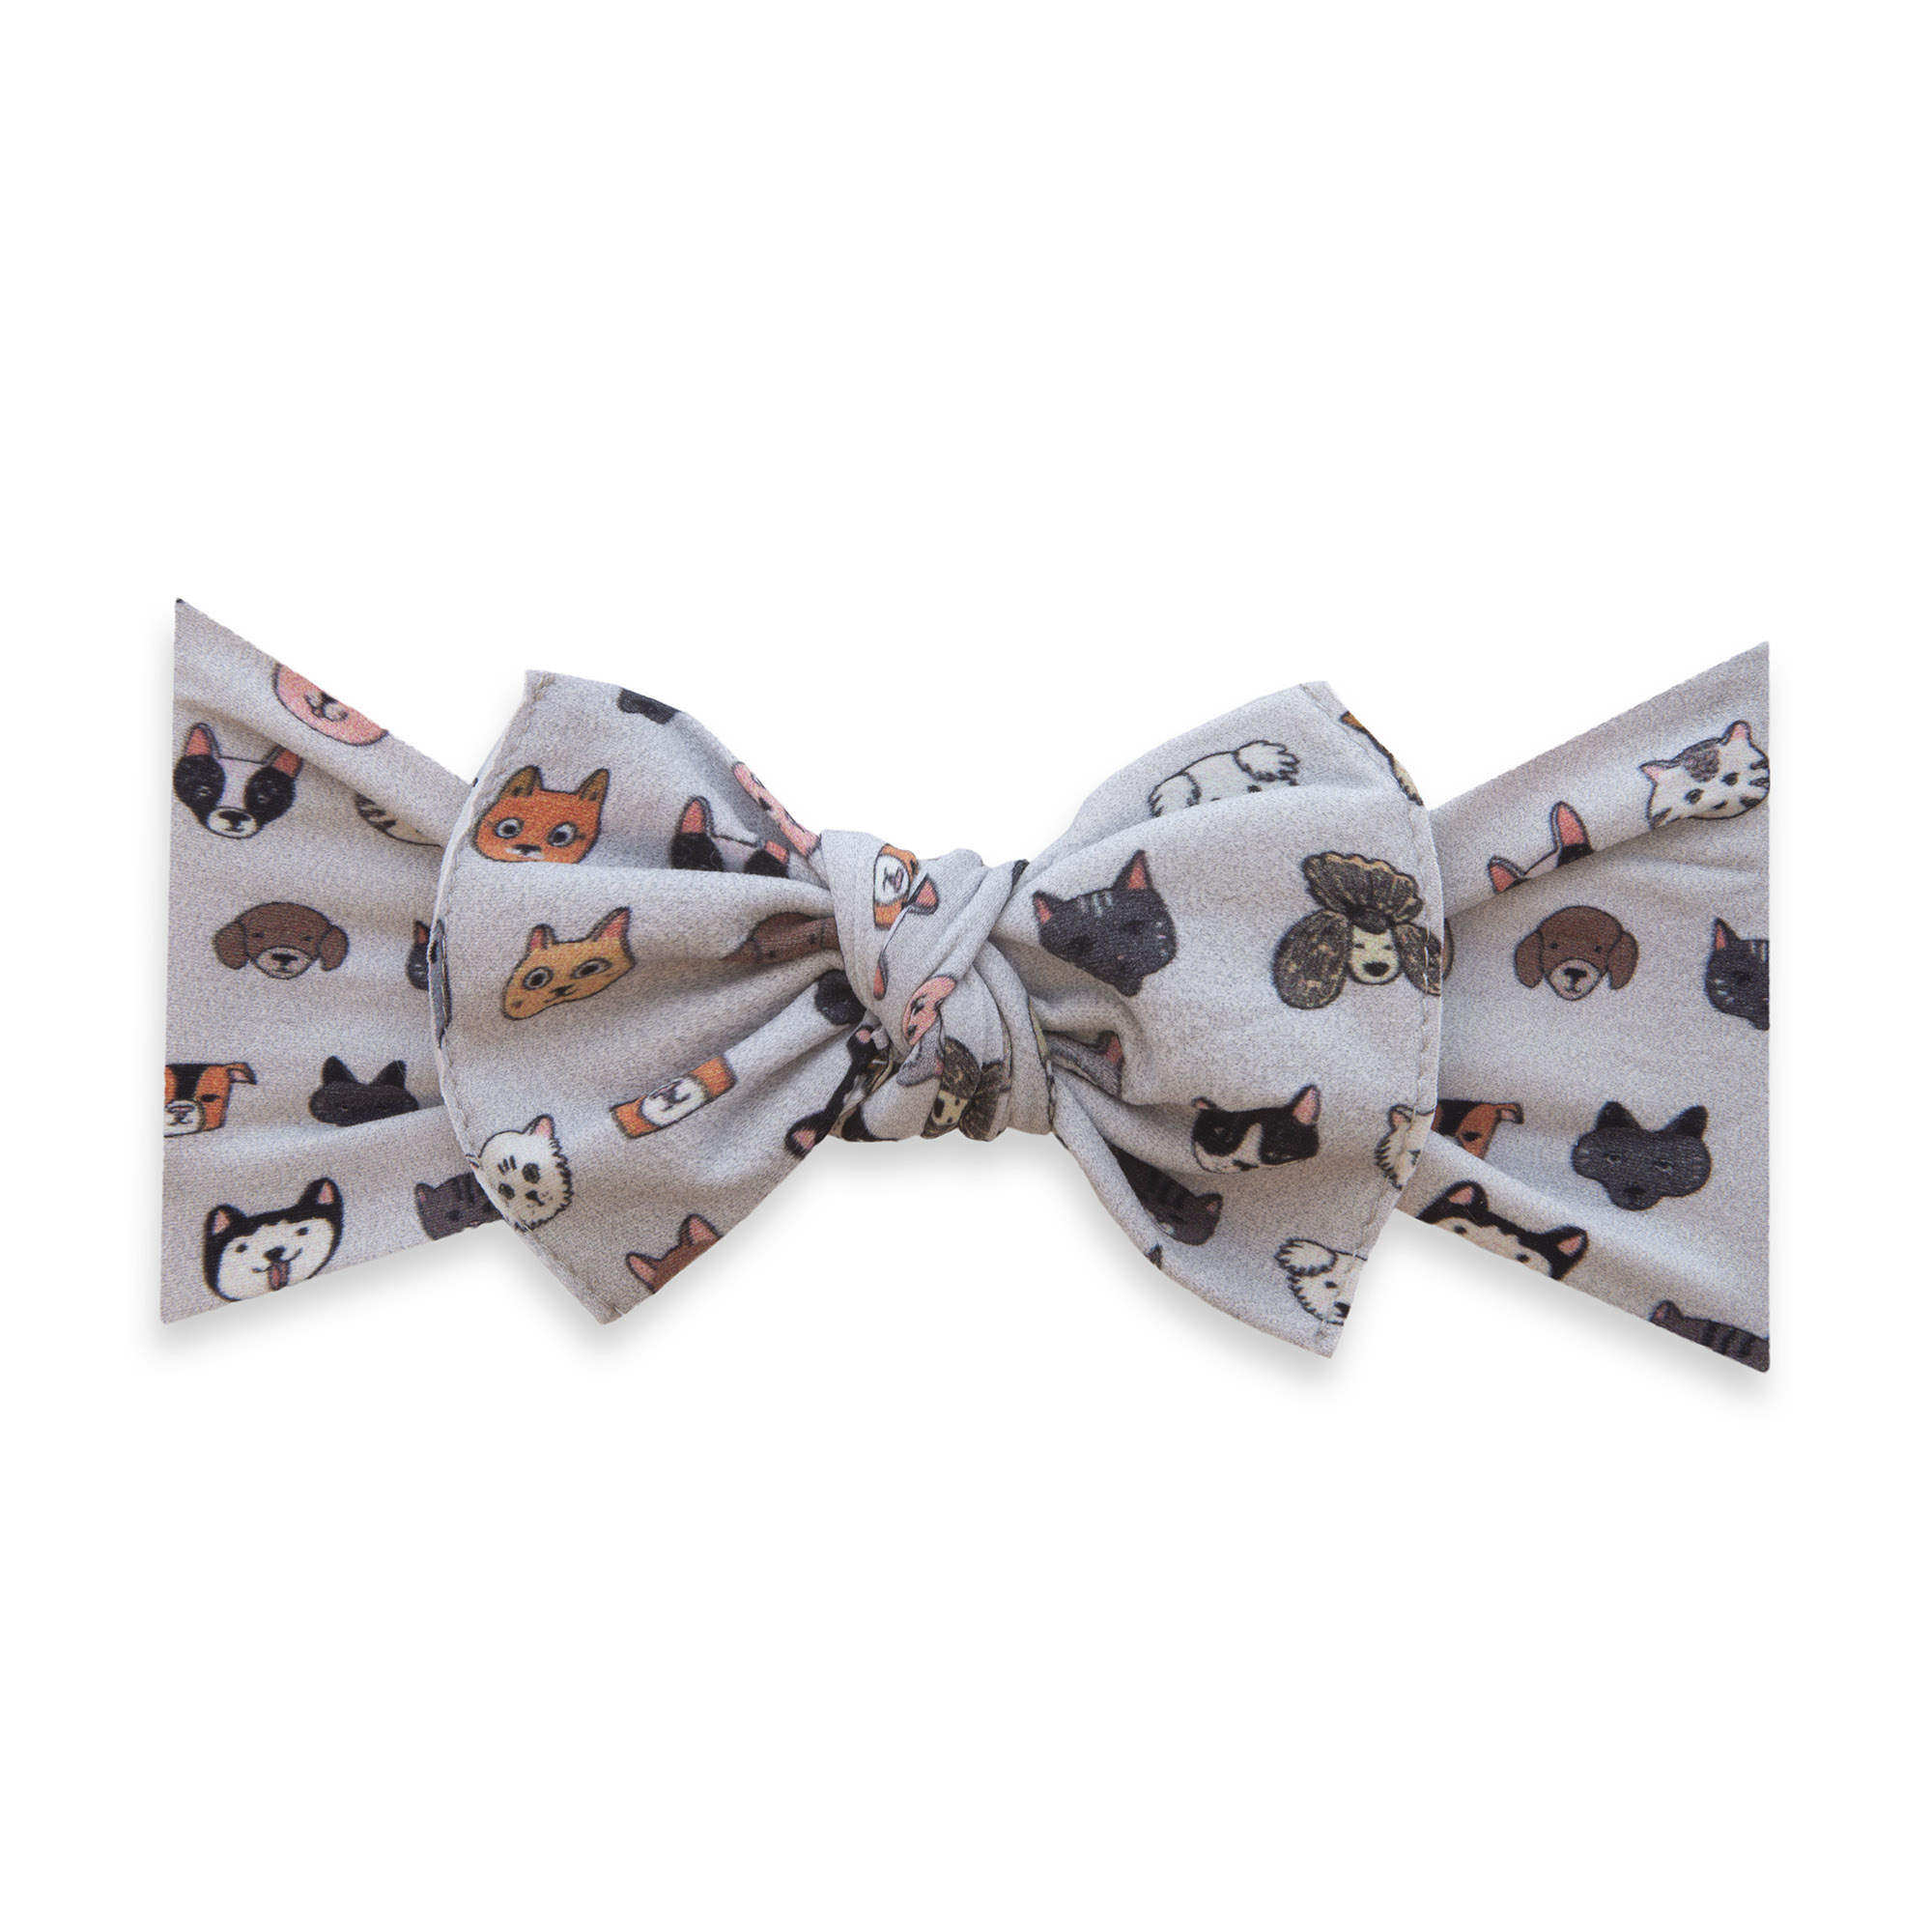 Baby Bling Bows Printed Knot Headband in Pet Pals